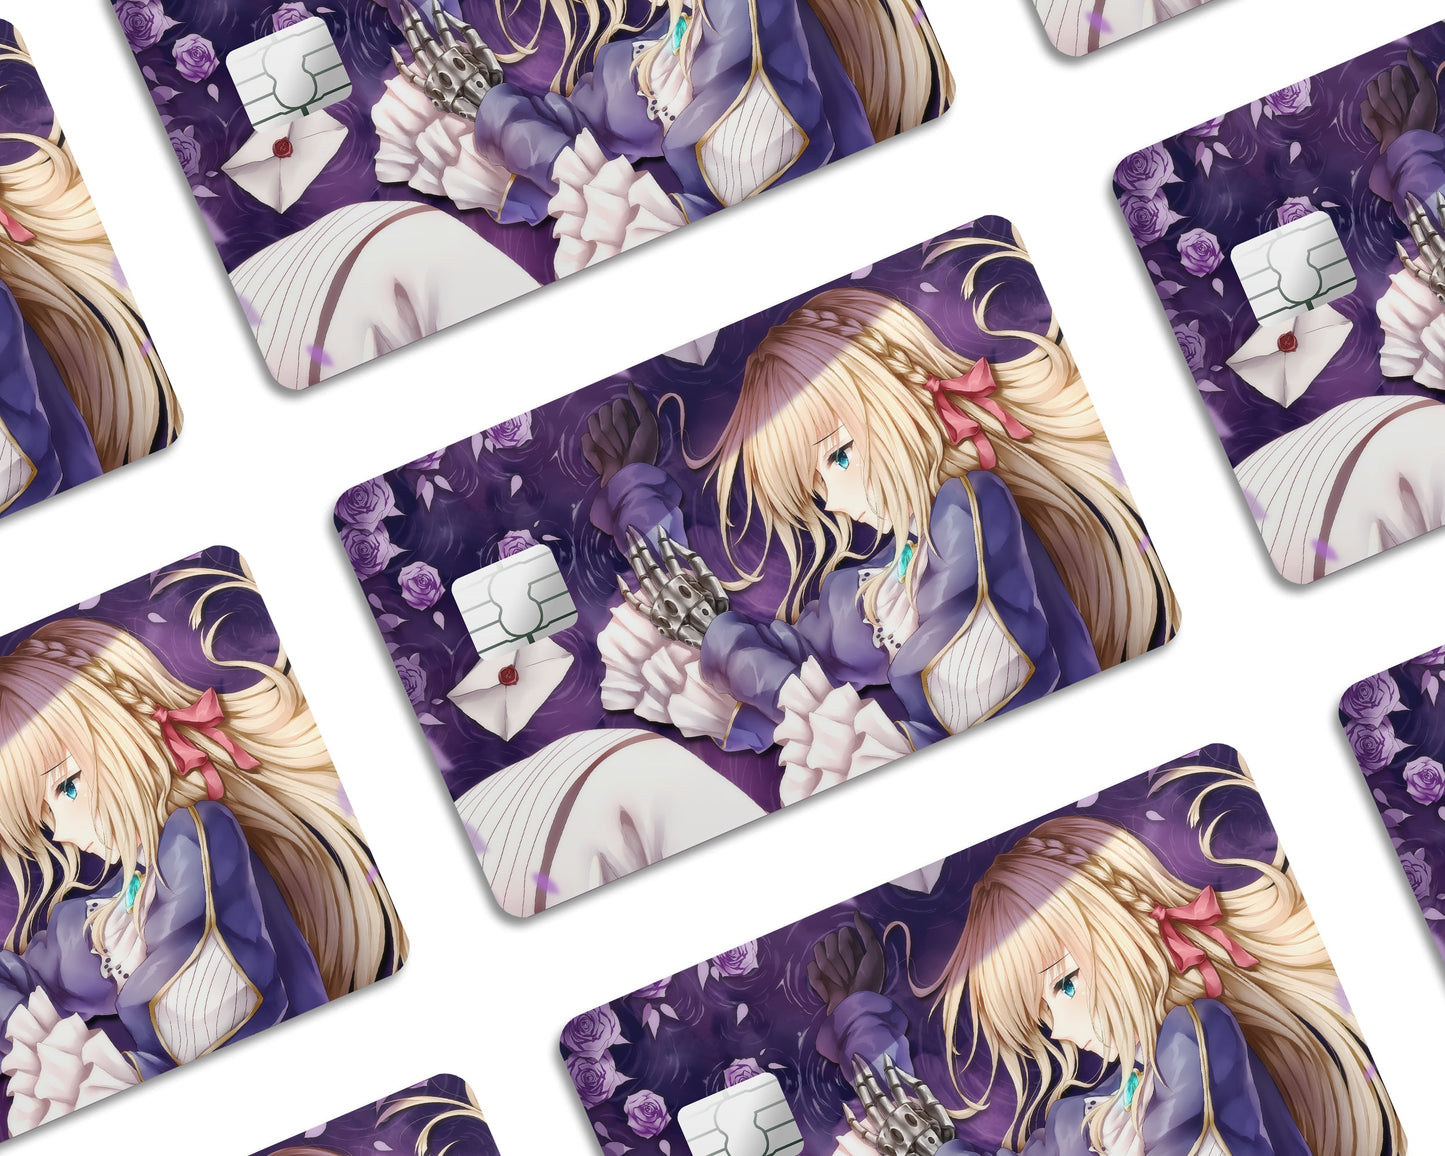 Anime Town Creations Credit Card Violet Evergarden Half Skins - Anime Violet Evergarden Credit Card Skin